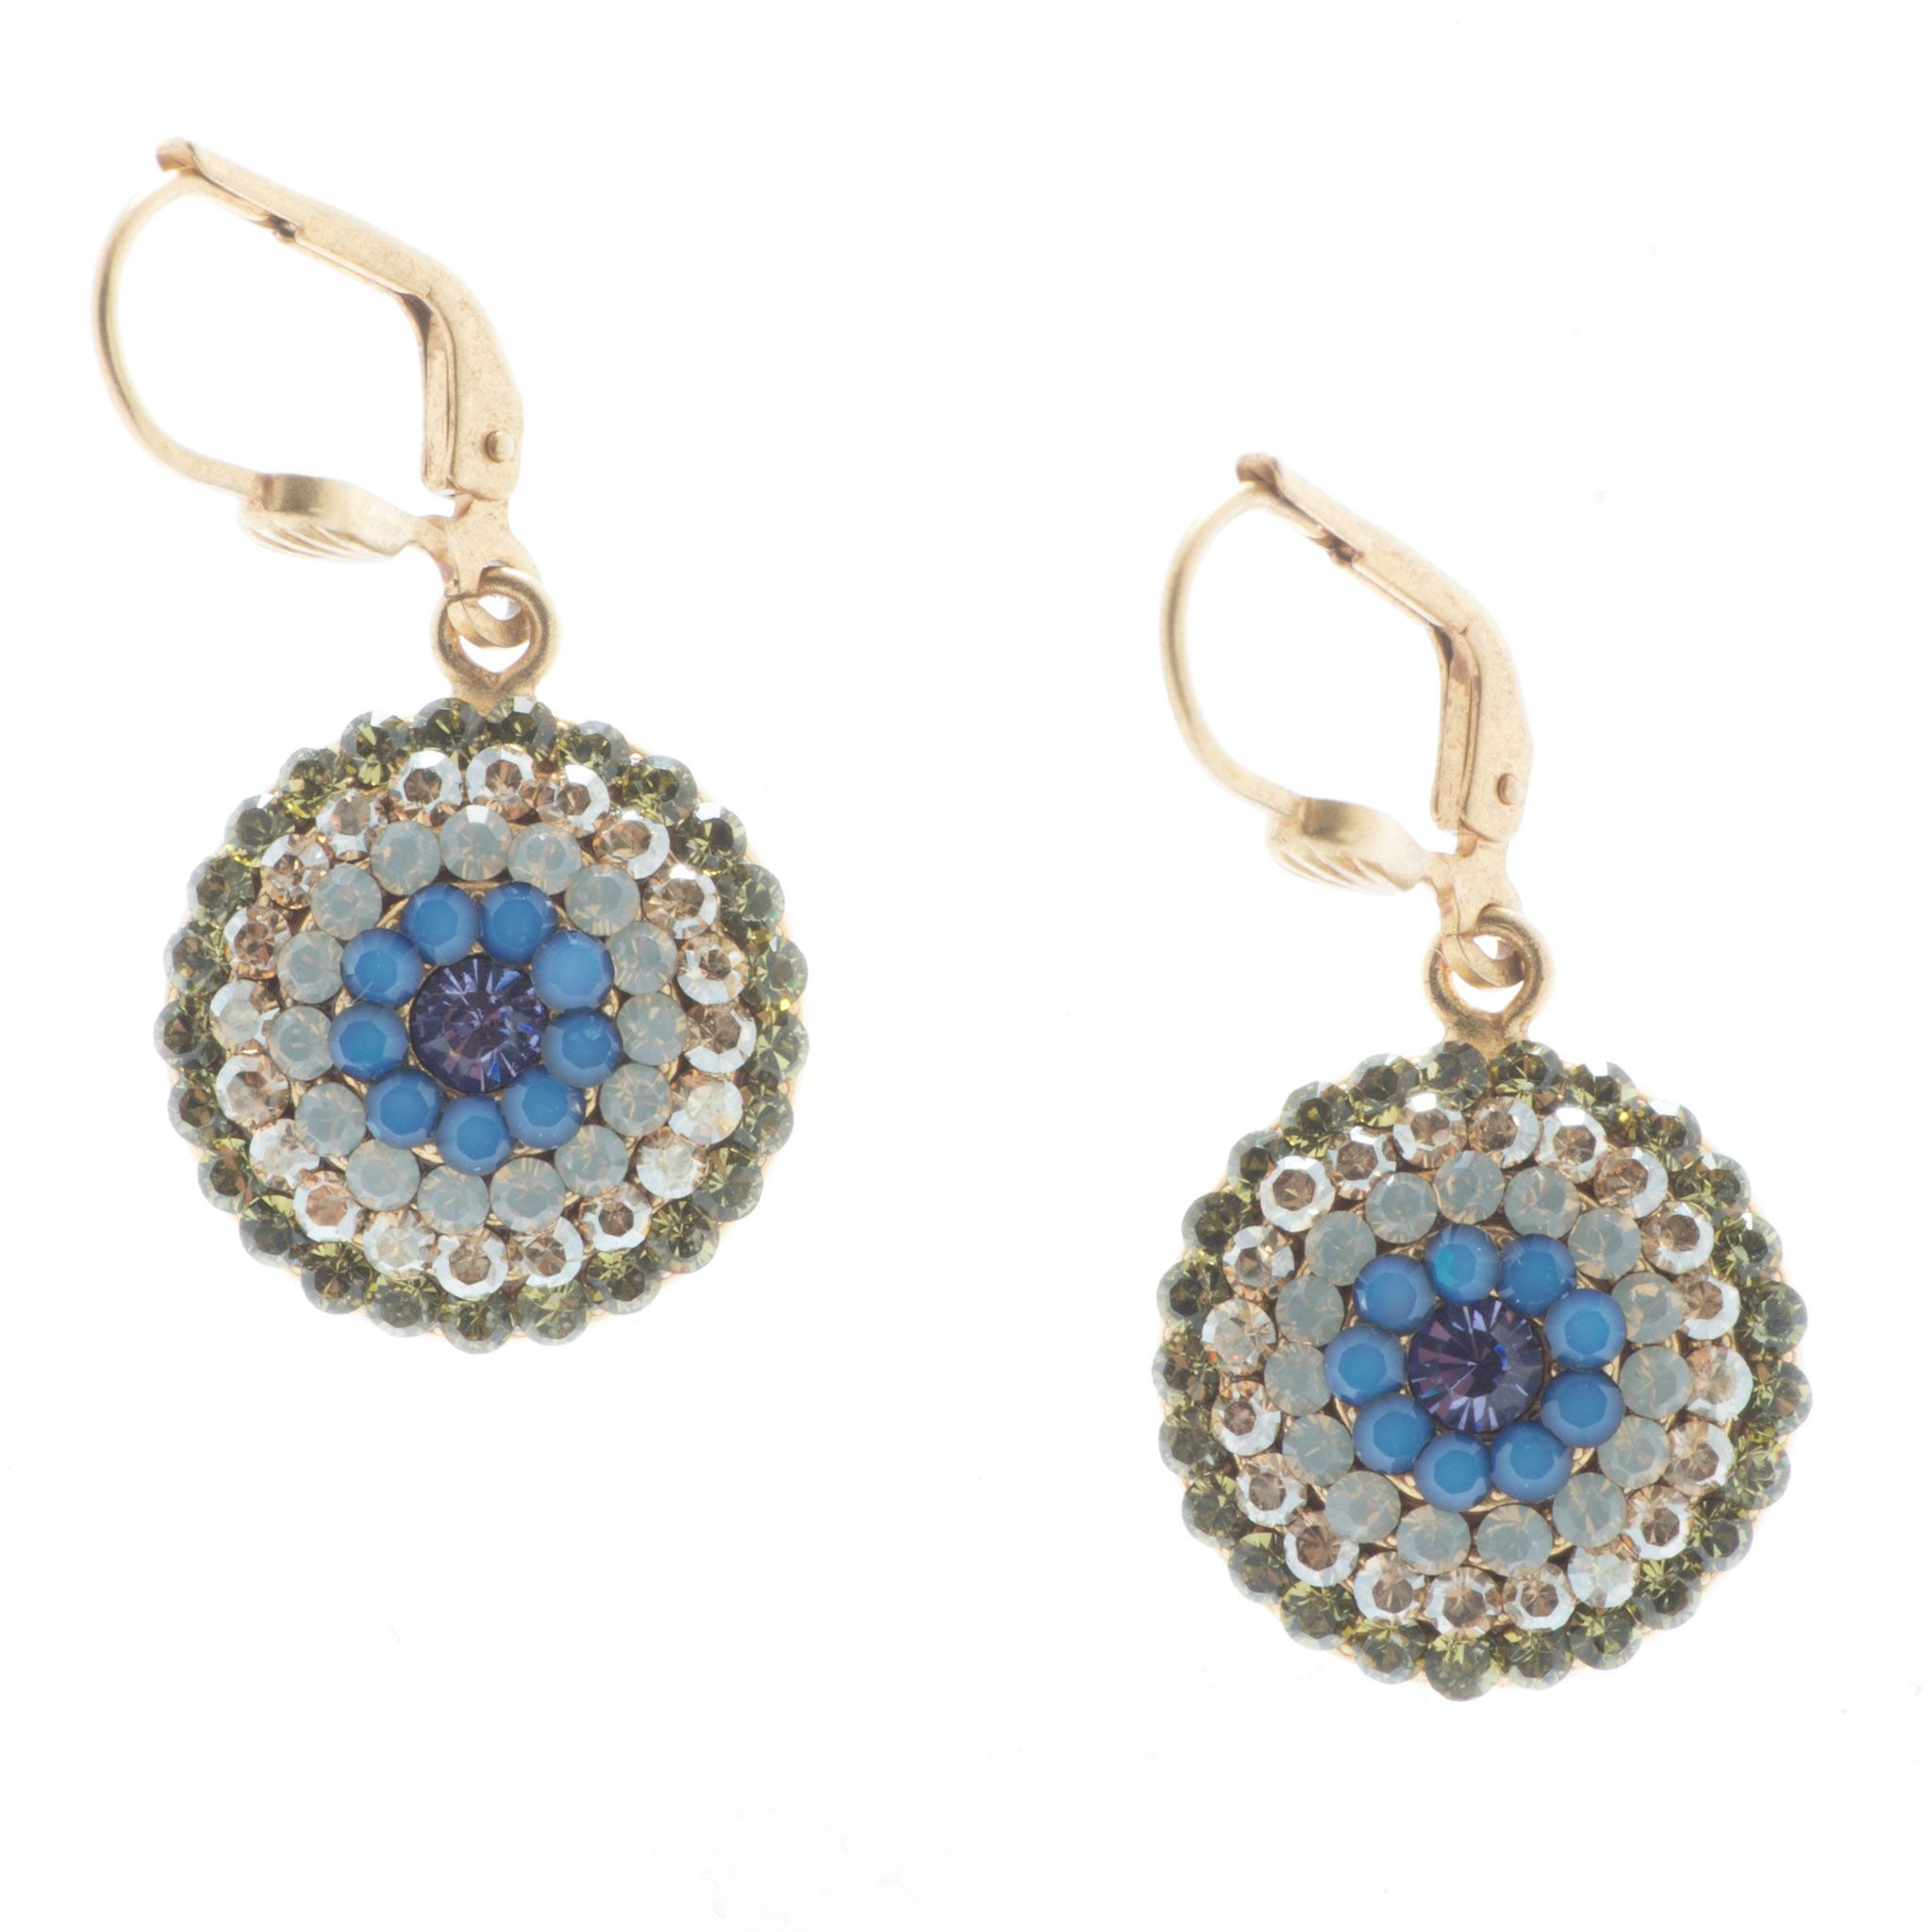 Catherine Popesco Earrings
 Catherine Popesco Gold Round Pave Crystal Earrings Sky